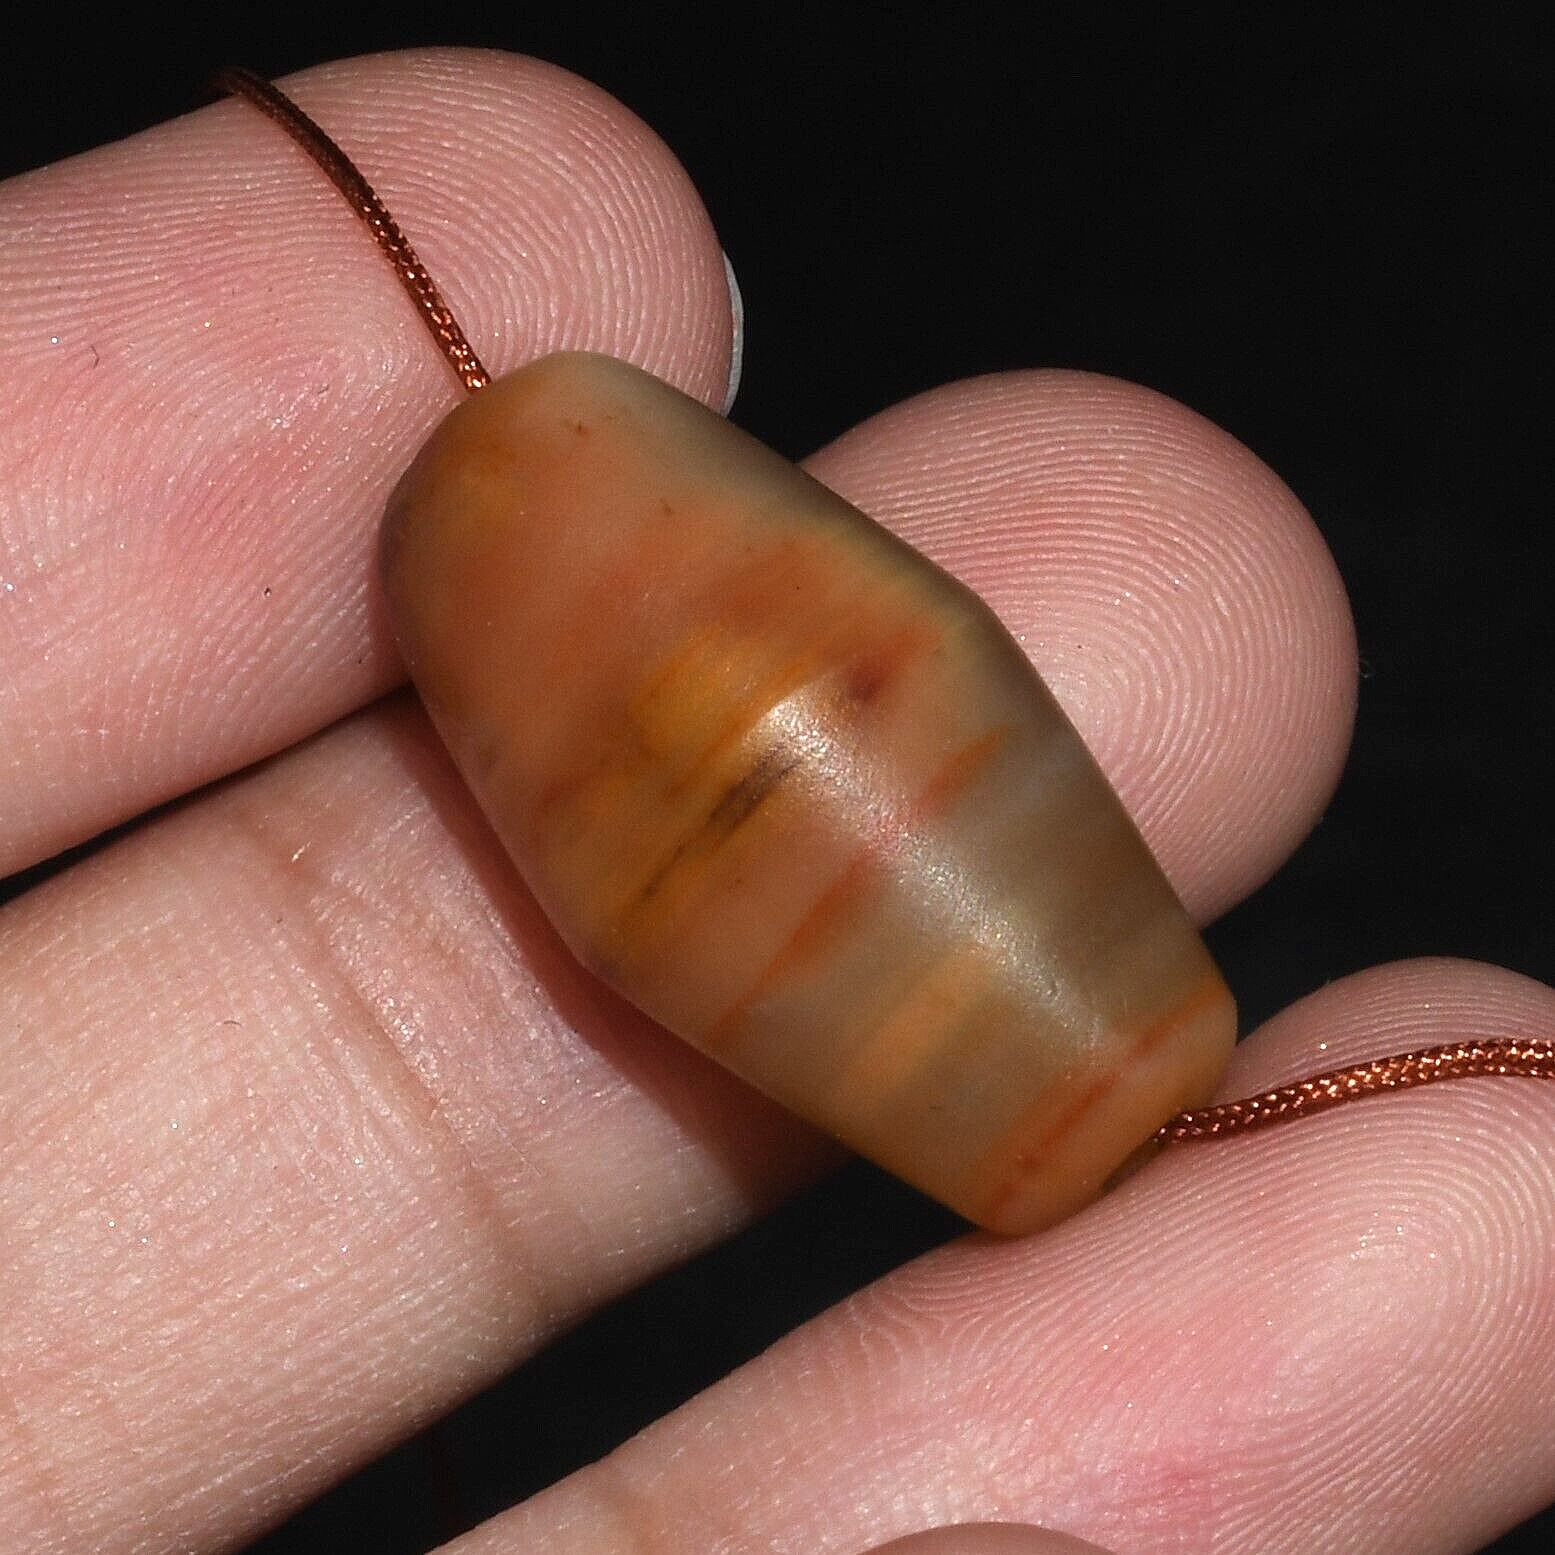 Authentic Ancient Bactrian Agate Stone Bead in Perfect Condition